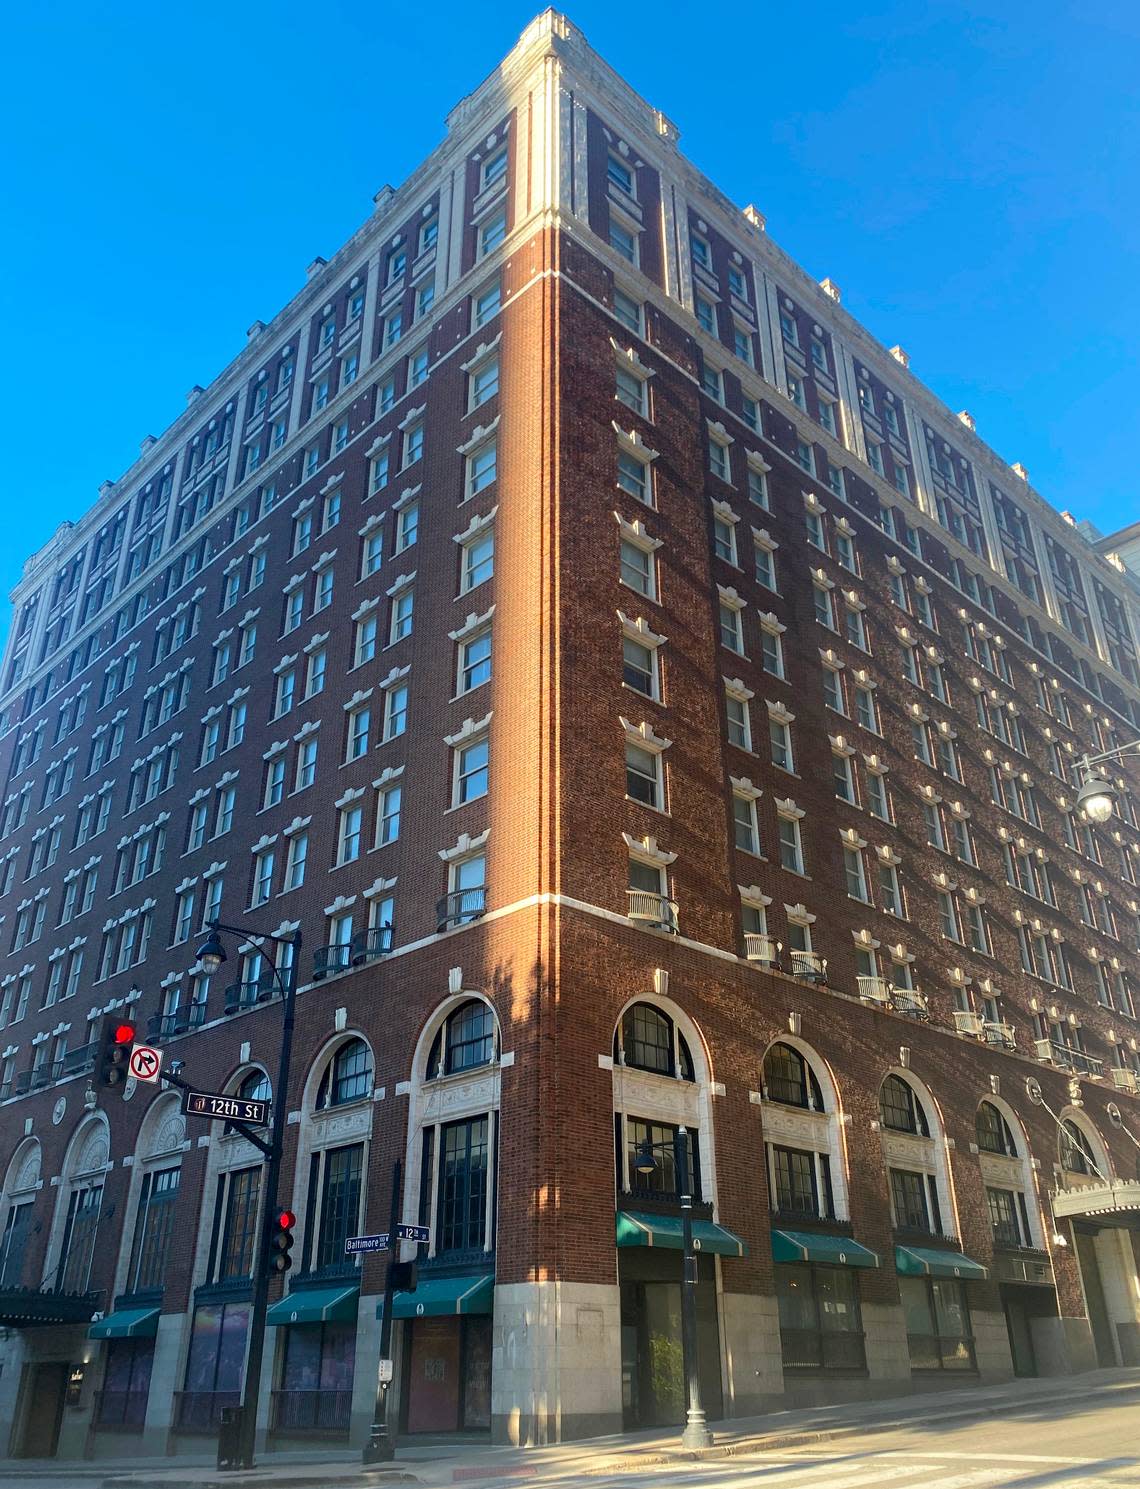 The Hotel Muehlebach, now part of the Kansas City Marriott Downtown.